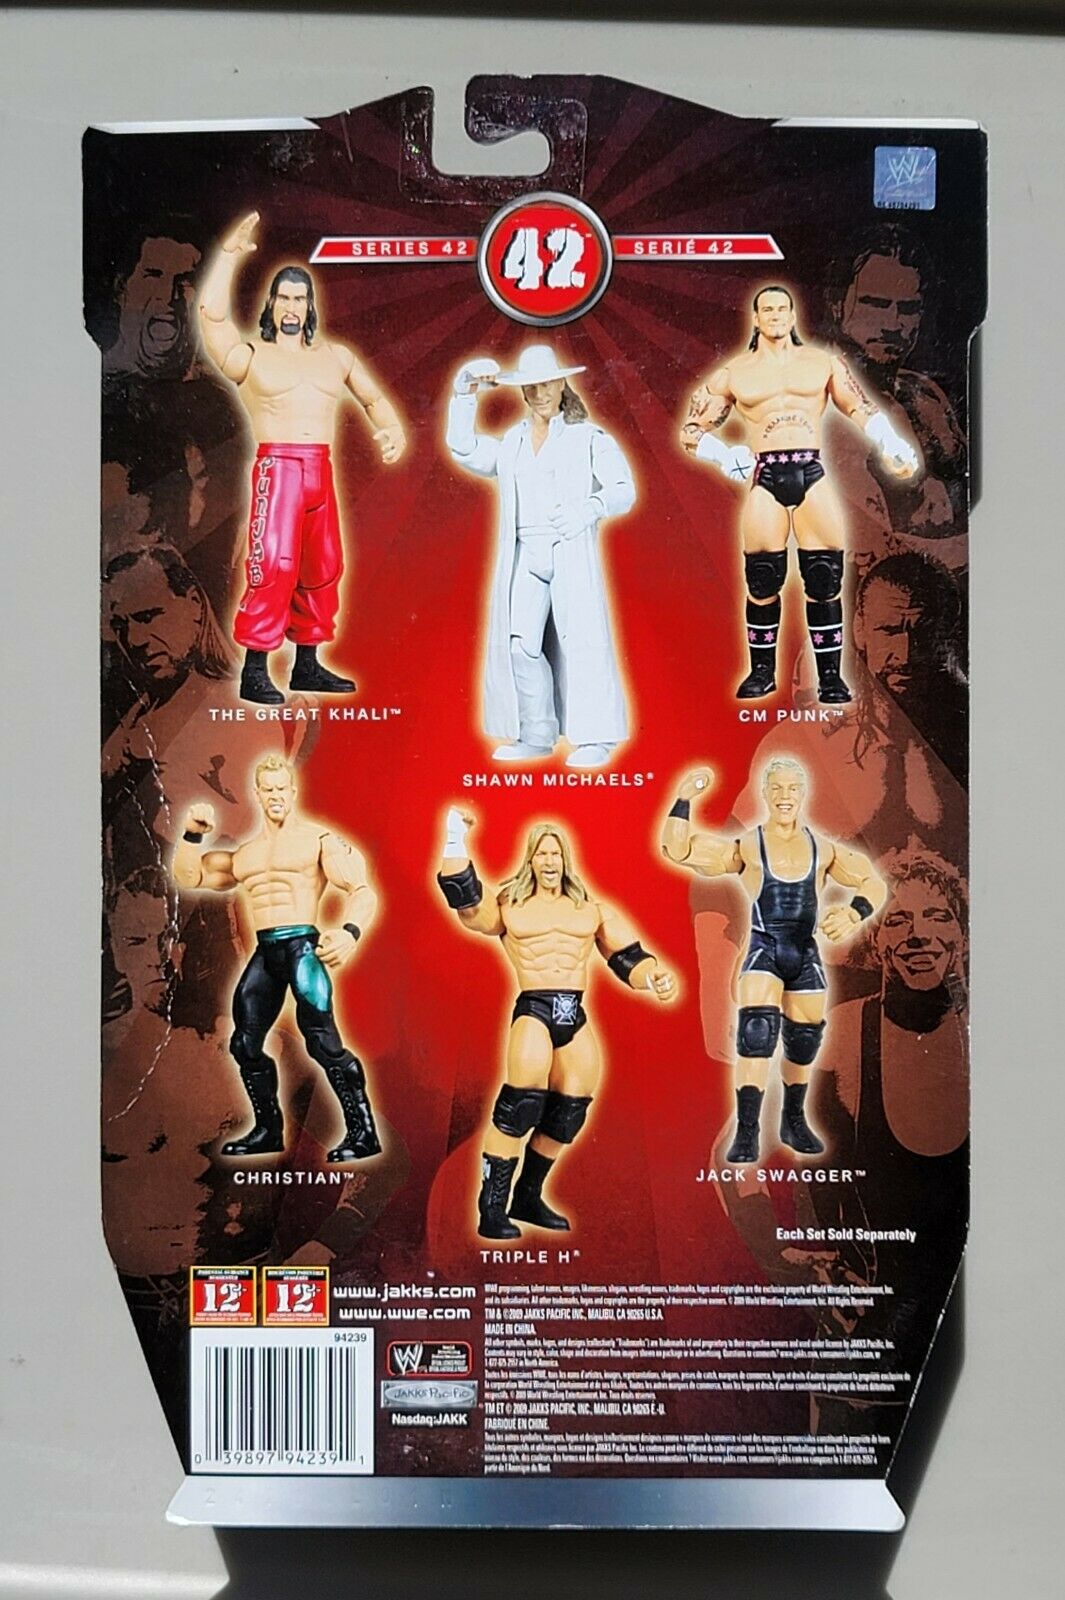 2009 WWE Jakks Pacific Ruthless Aggression Series 42 Shawn Michaels [Chase]